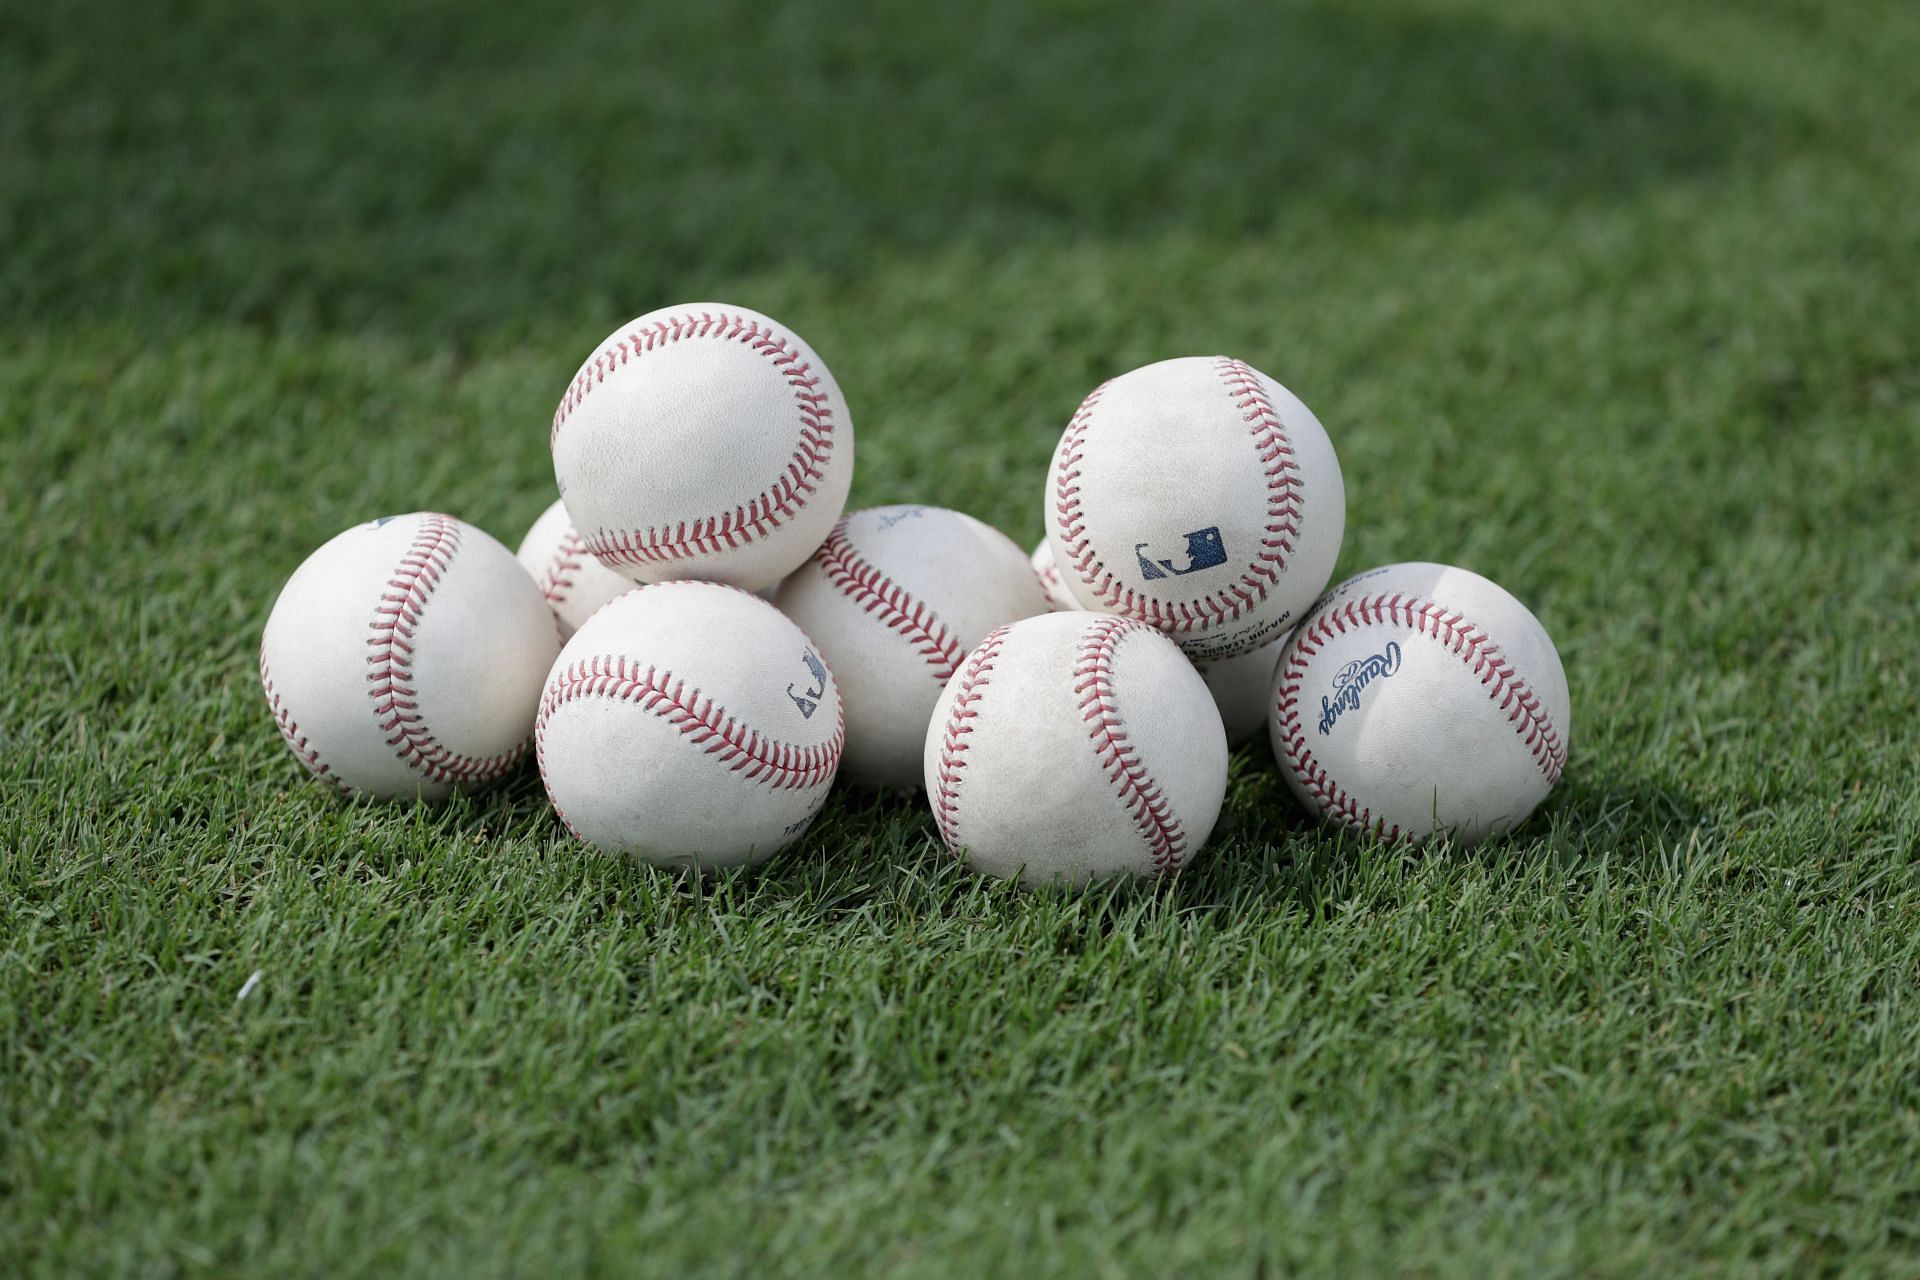 The MLB made its baseballs lighter and started storing them in humidors.